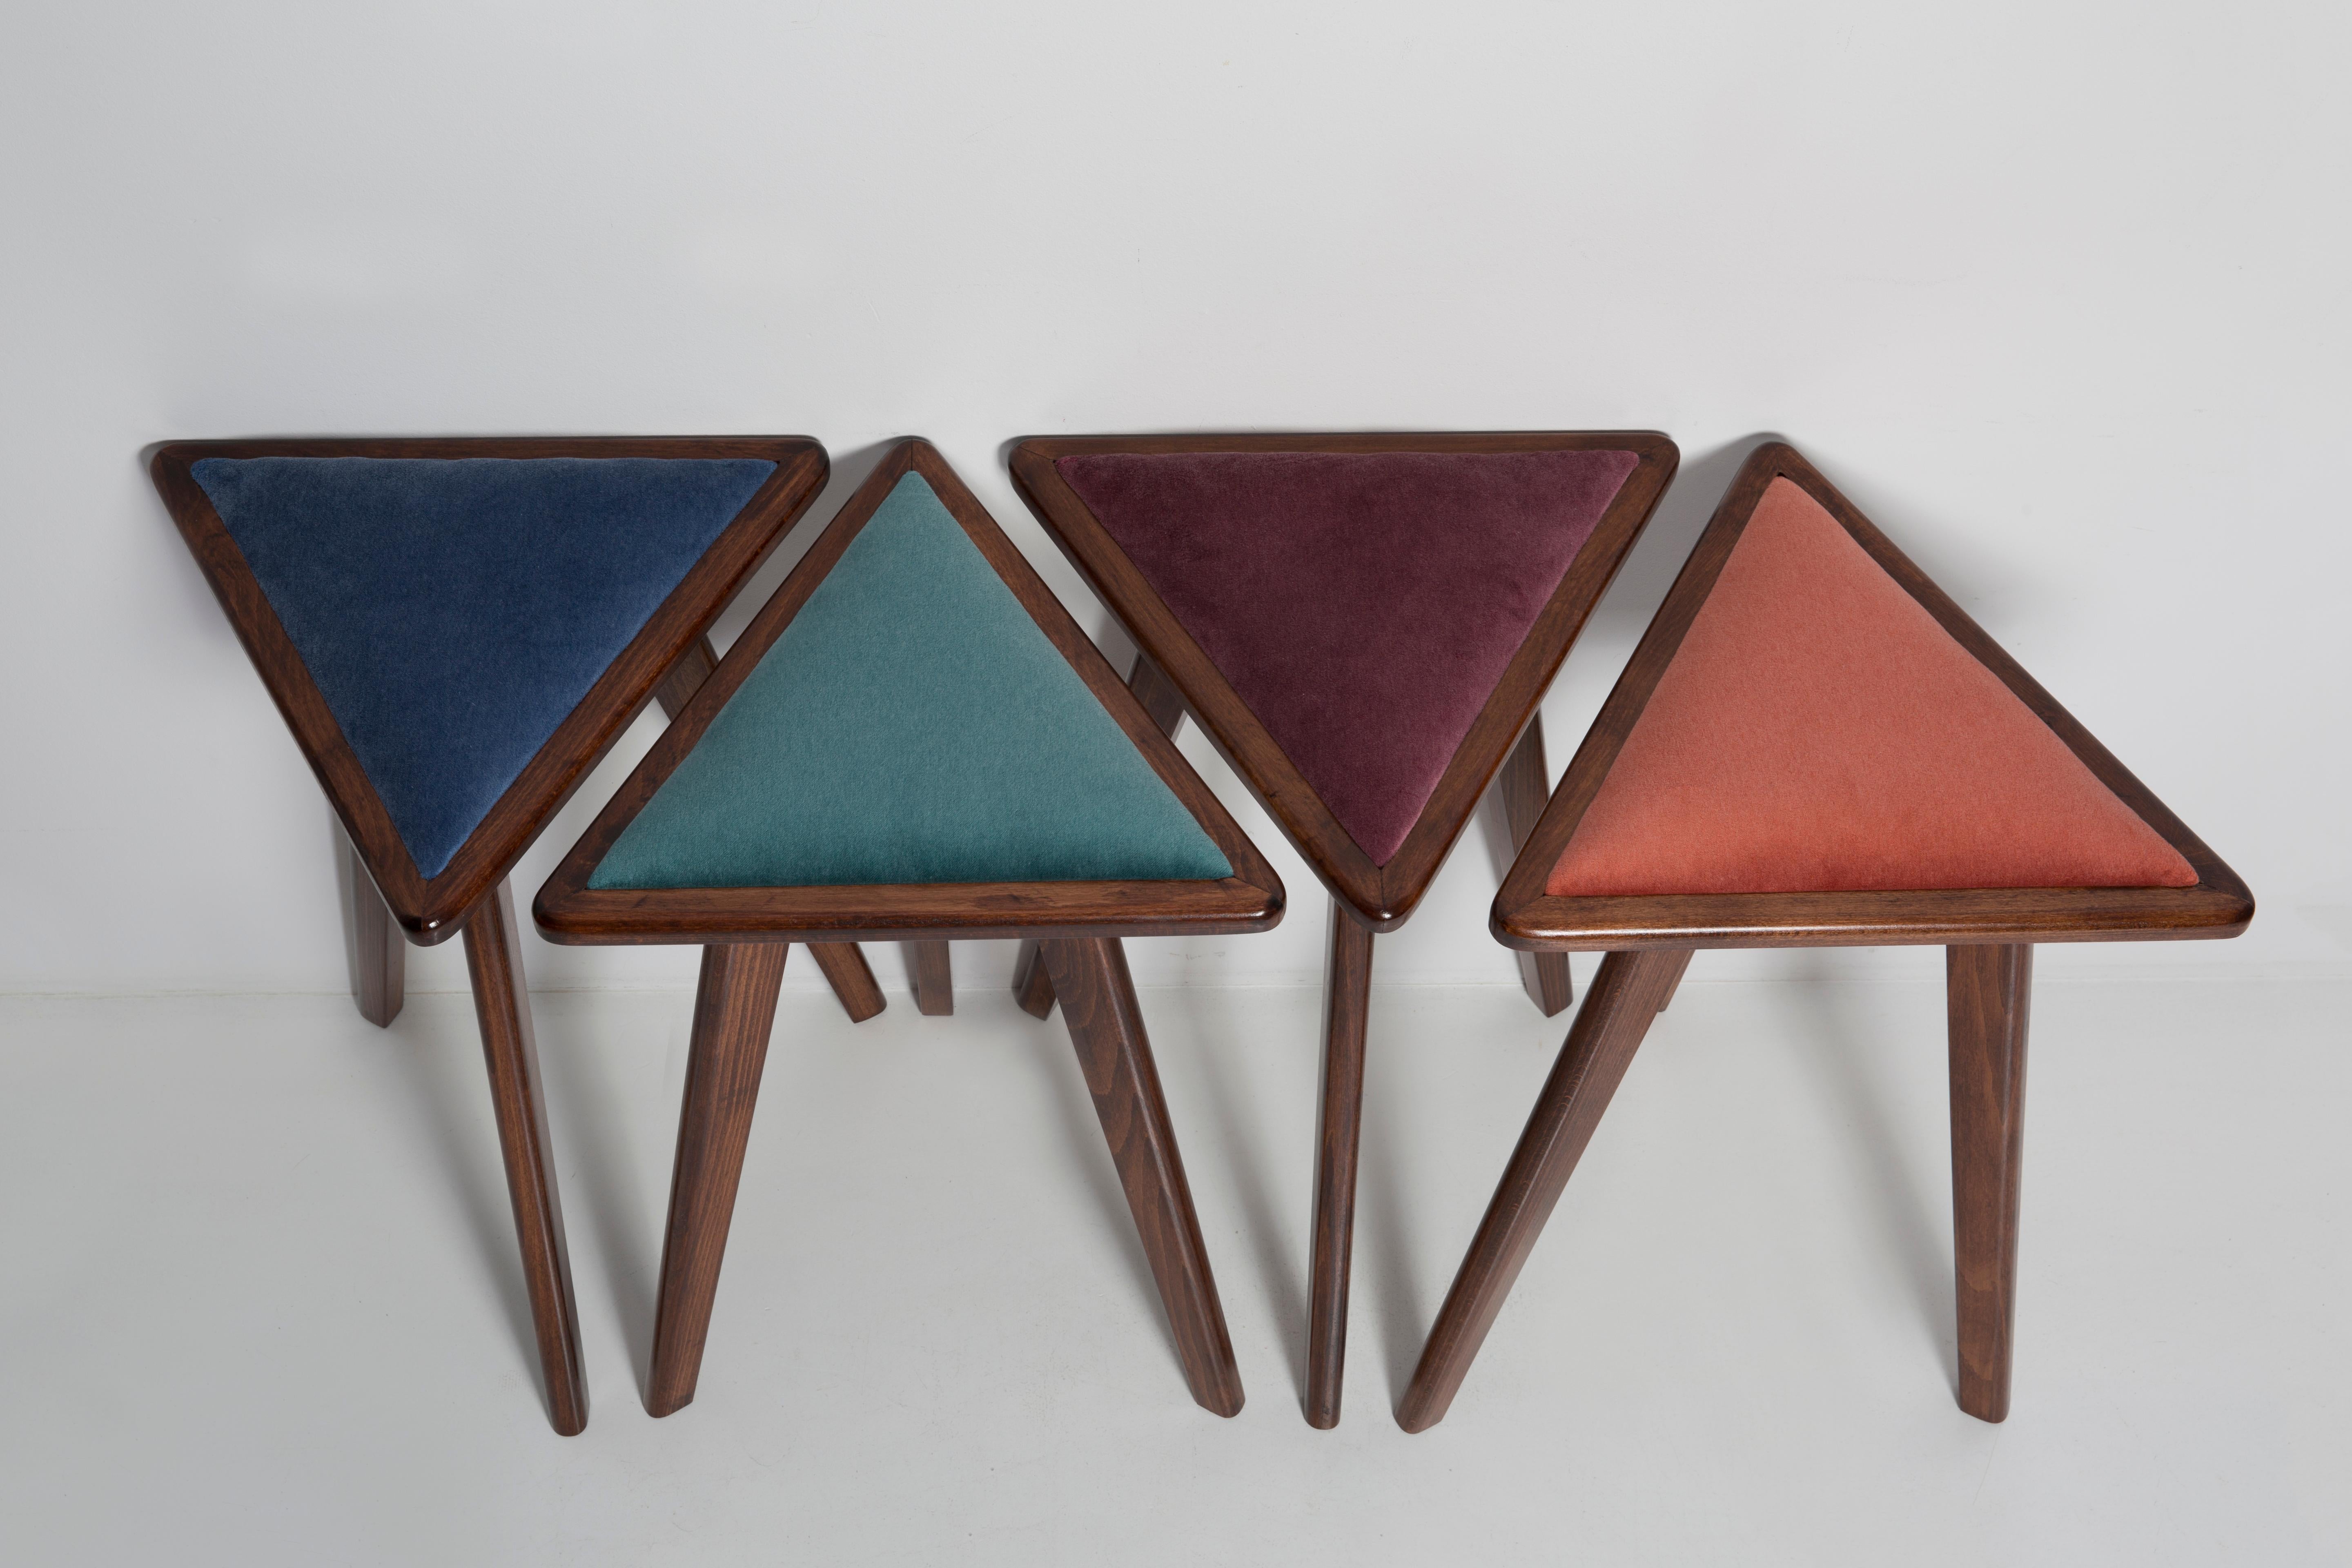 Comfortable and stabile triangle stools.
They are contemporary stools inspired of 1960s style. 
They can be used as a bar stools.

Stools were designed by Vintola Studio, a Polish brand created by Ola Szewczul, designer of vintage interior